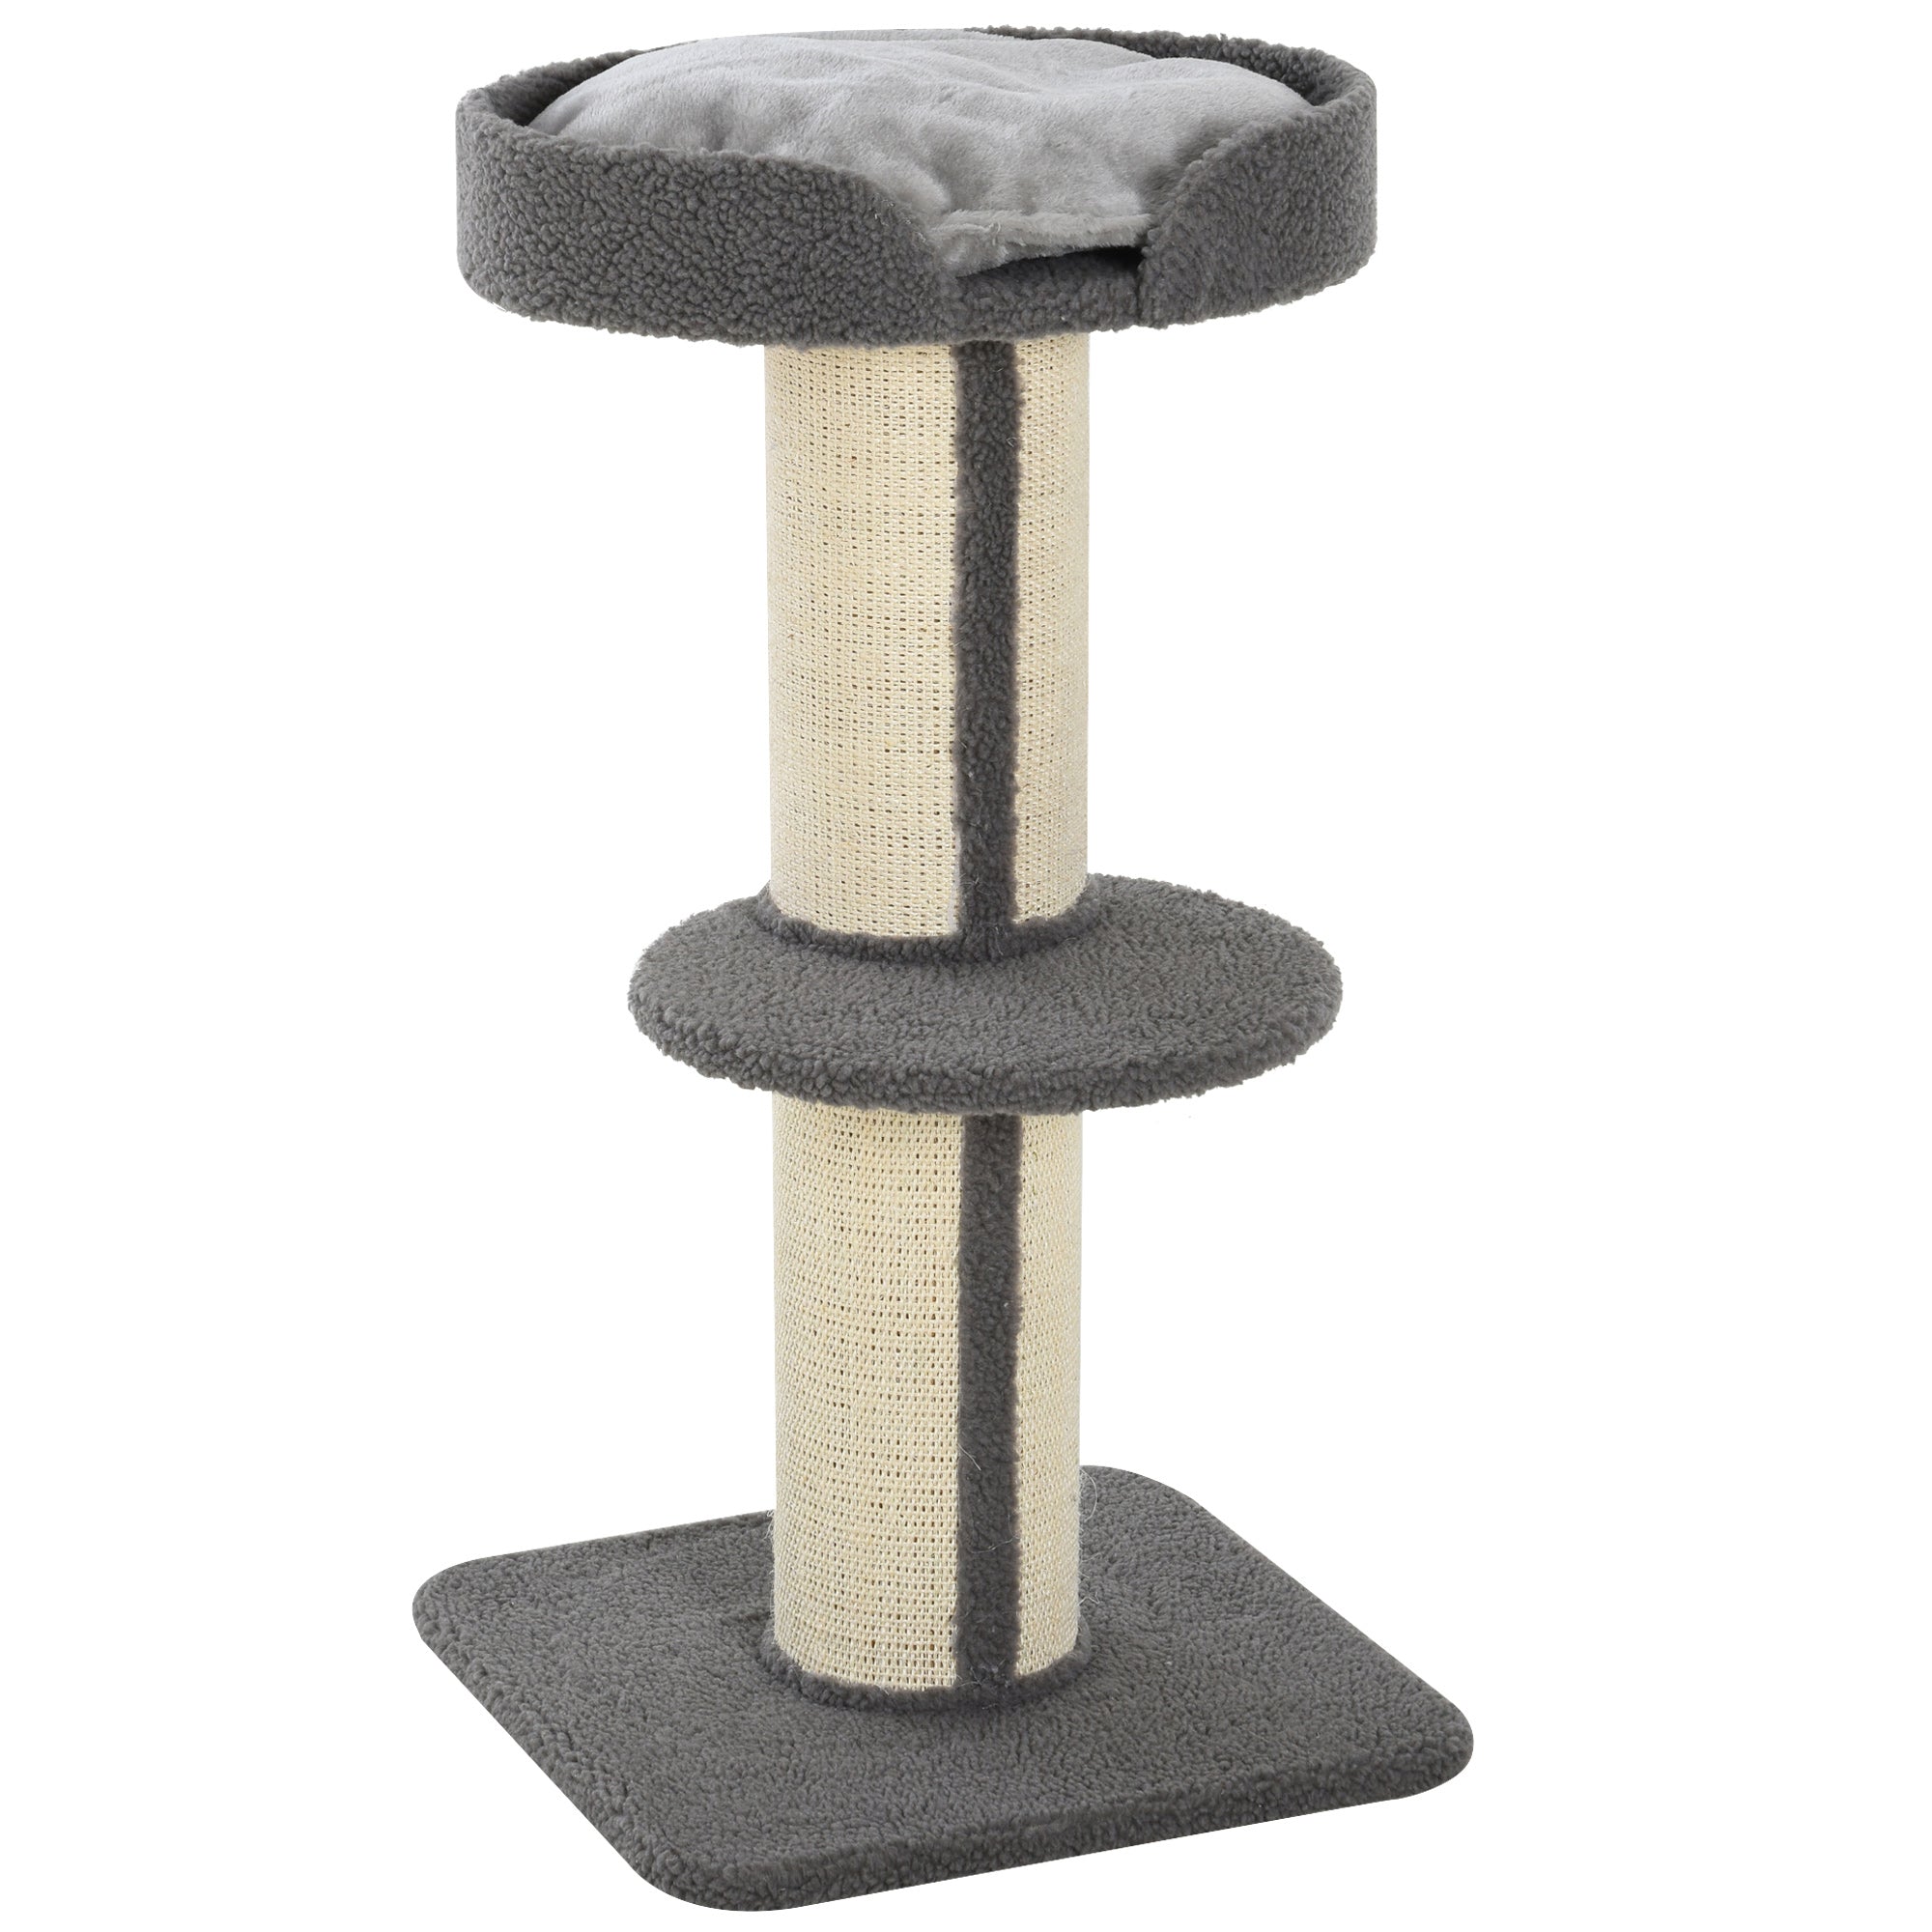 81cm Cat Tree with Sisal Scratching Post, Cat Tower Kitten Activity Center climbing frame with large platform Lamb Cashmere Perch, Grey-0